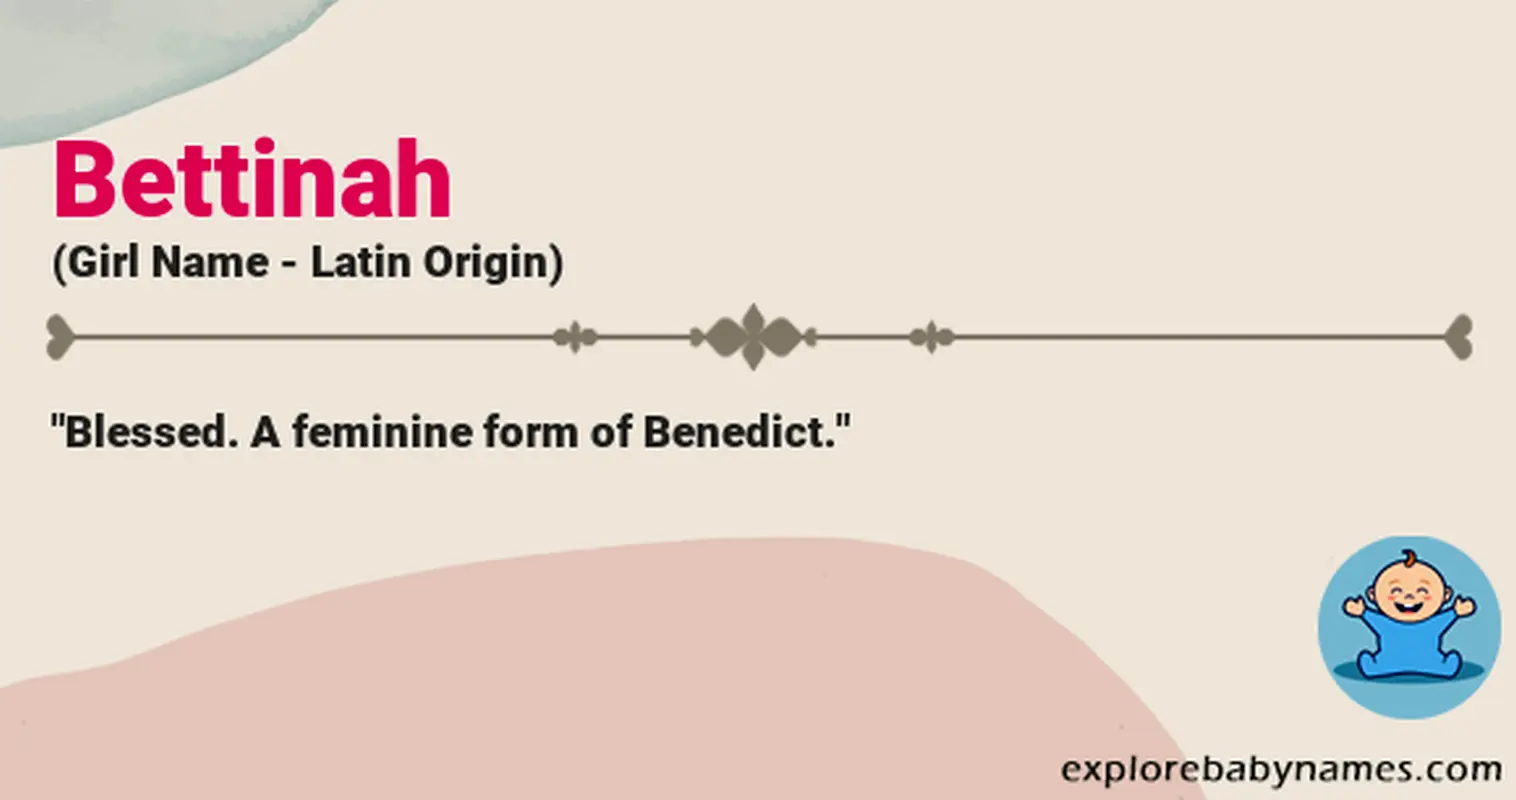 Meaning of Bettinah